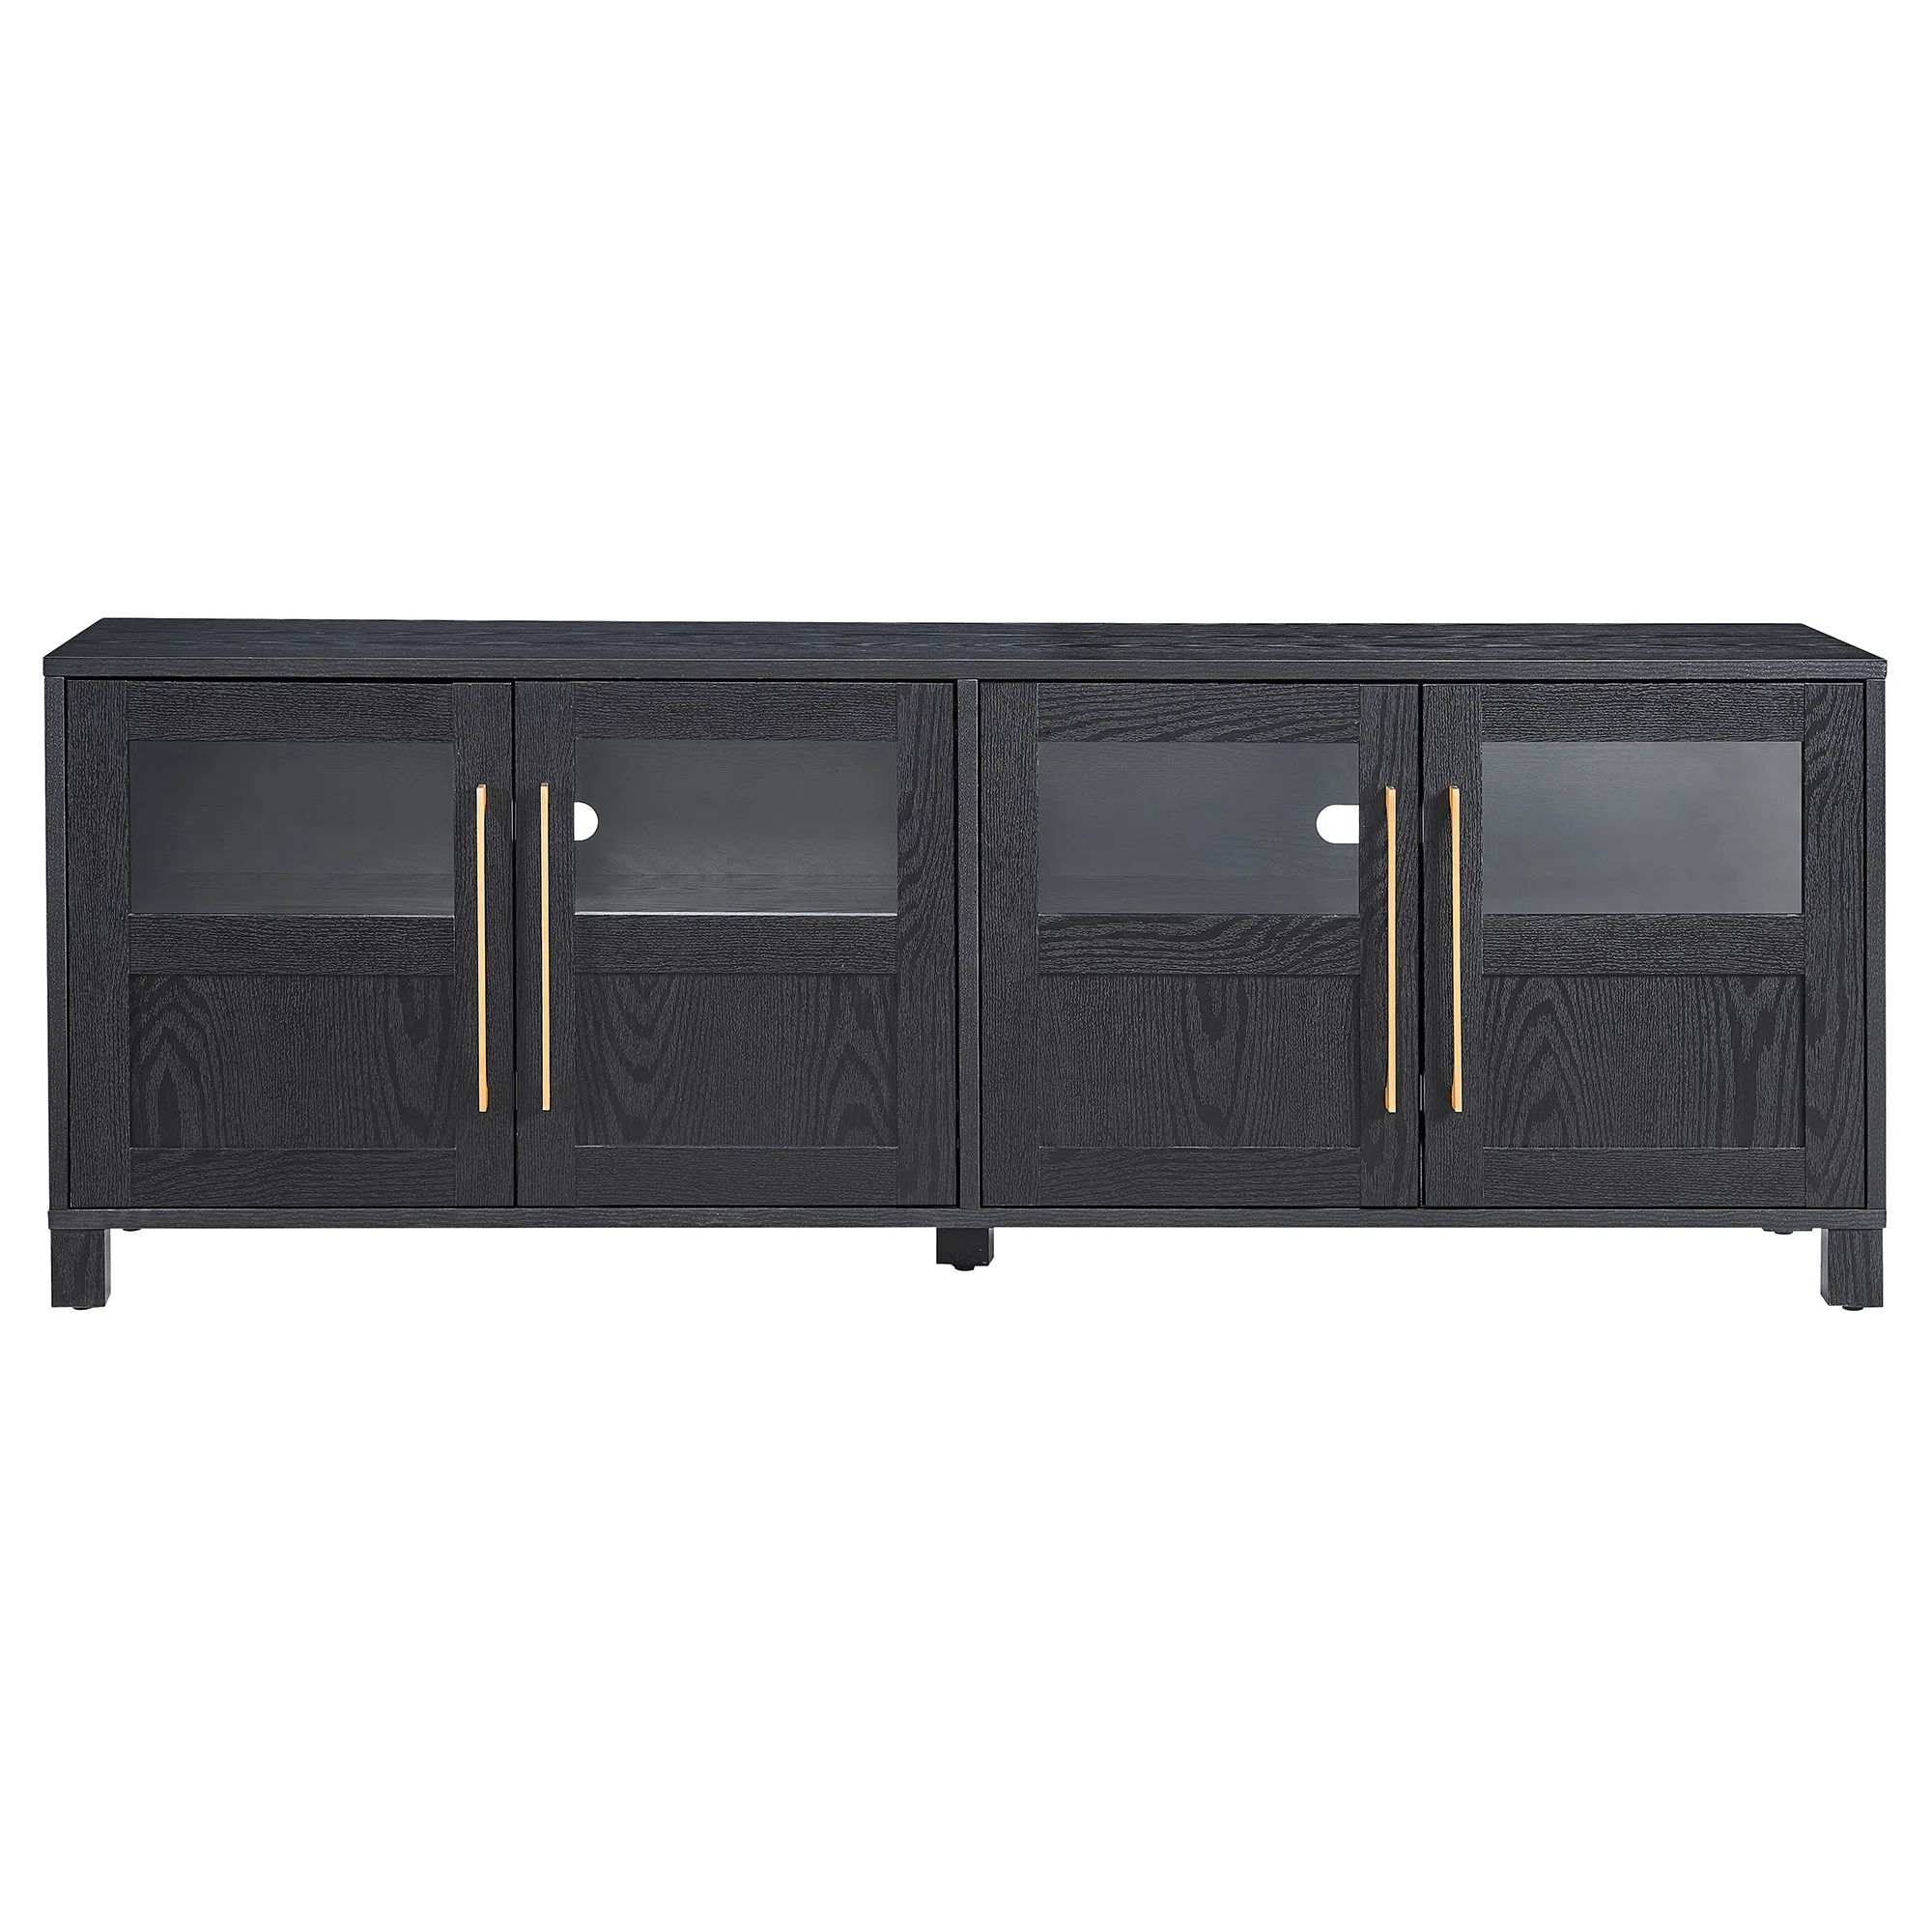 TV Stand for TVs up to 75" | Wayfair North America